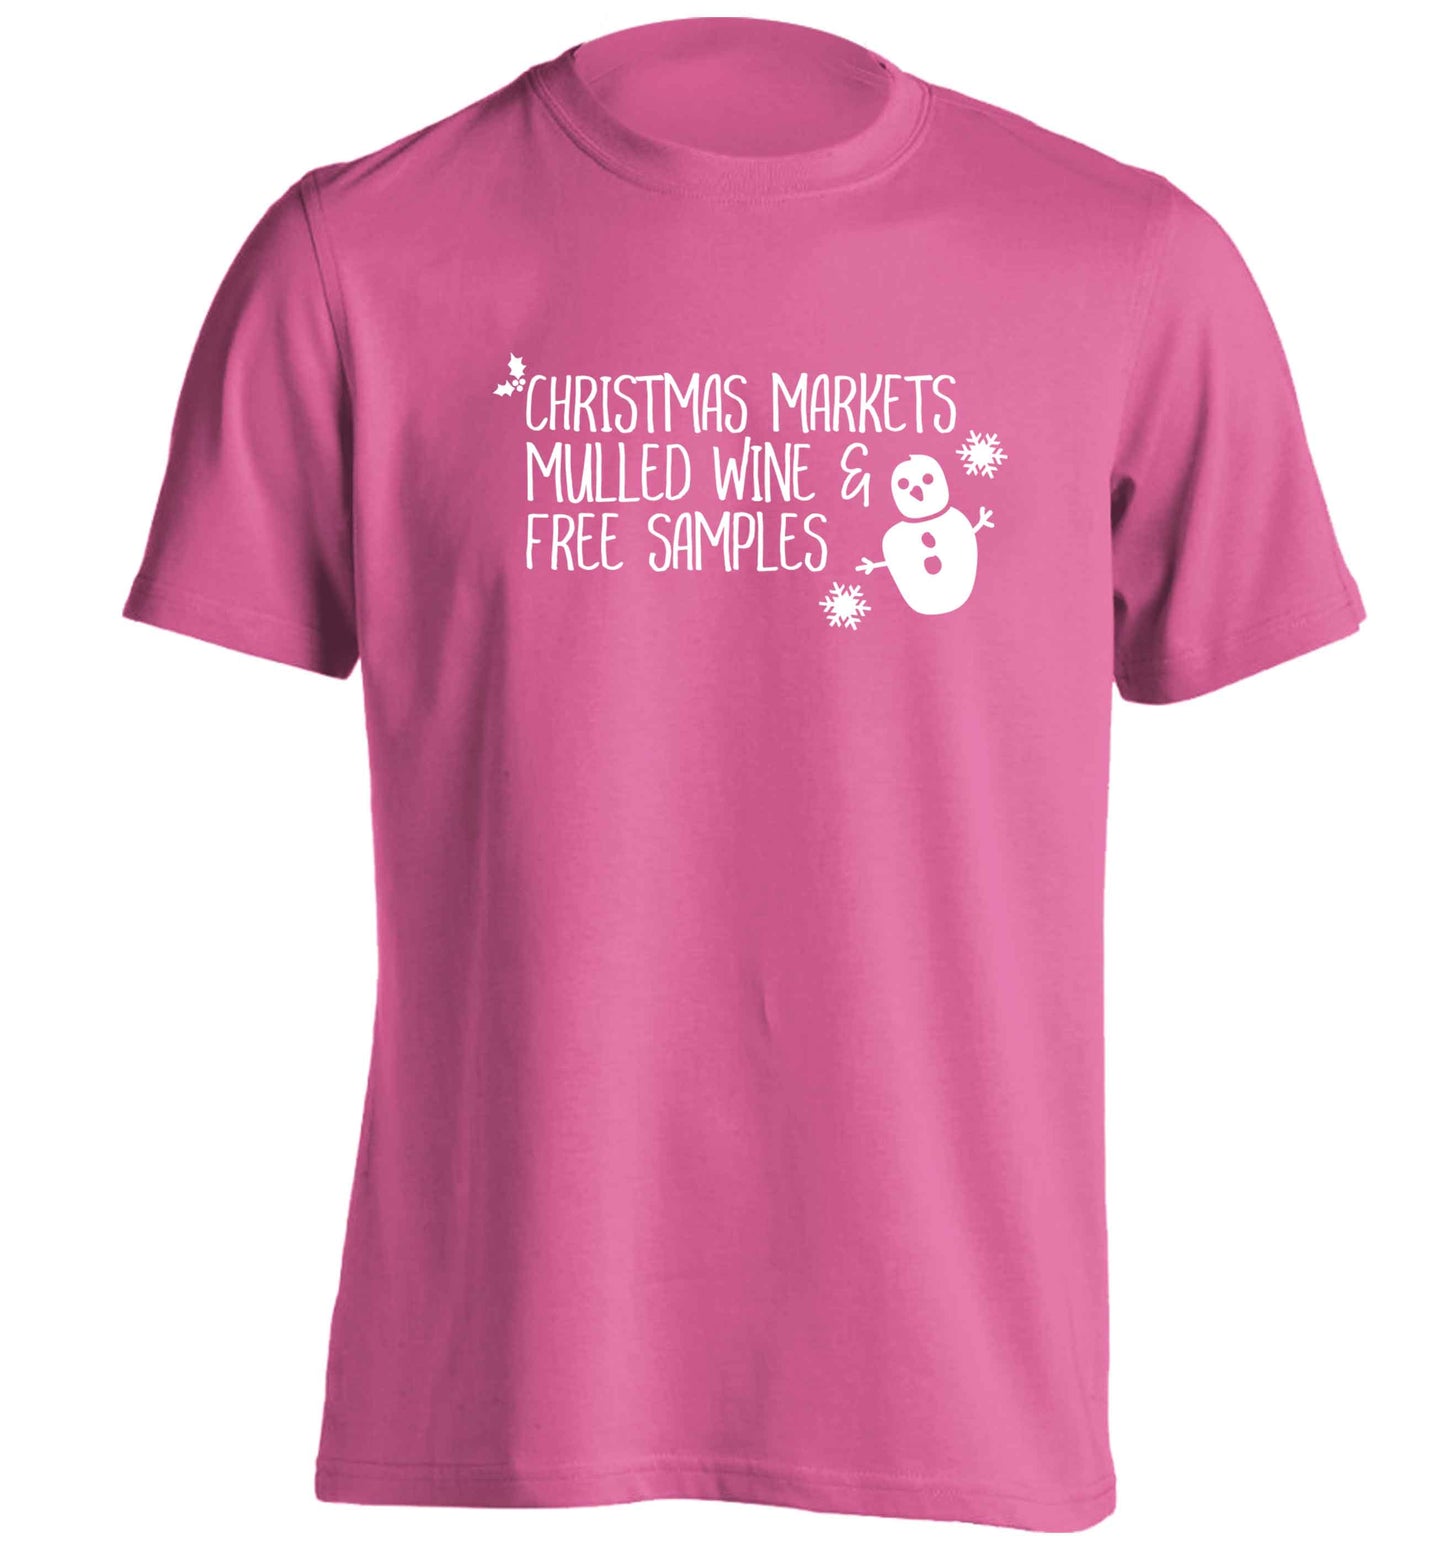 Christmas market mulled wine & free samples adults unisex pink Tshirt 2XL